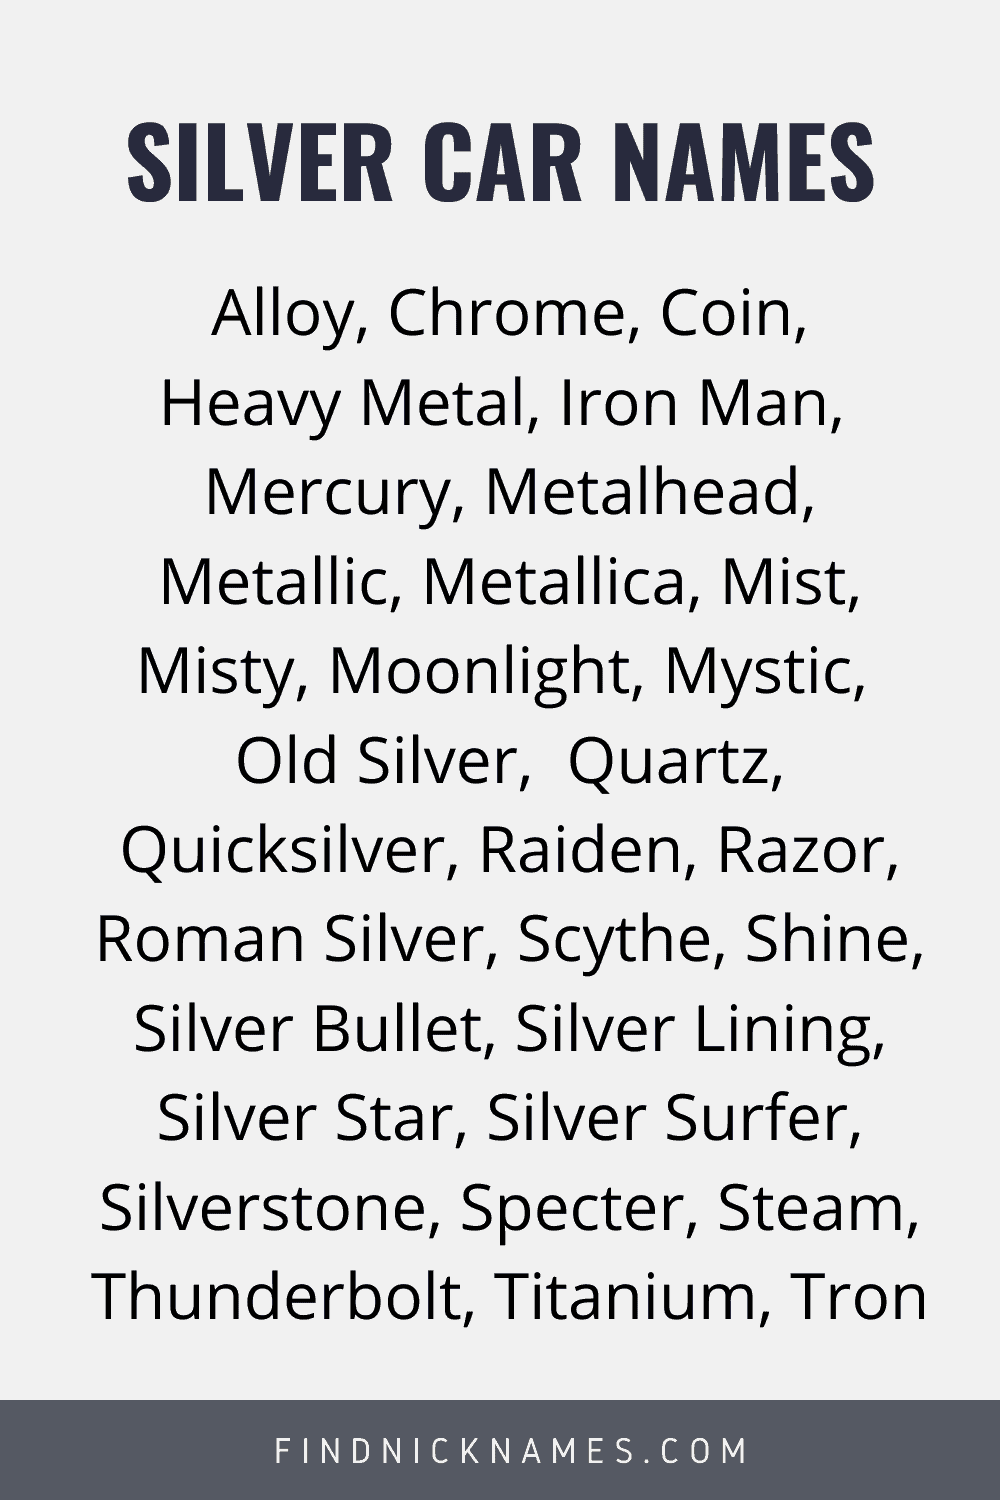 Silver names for cars